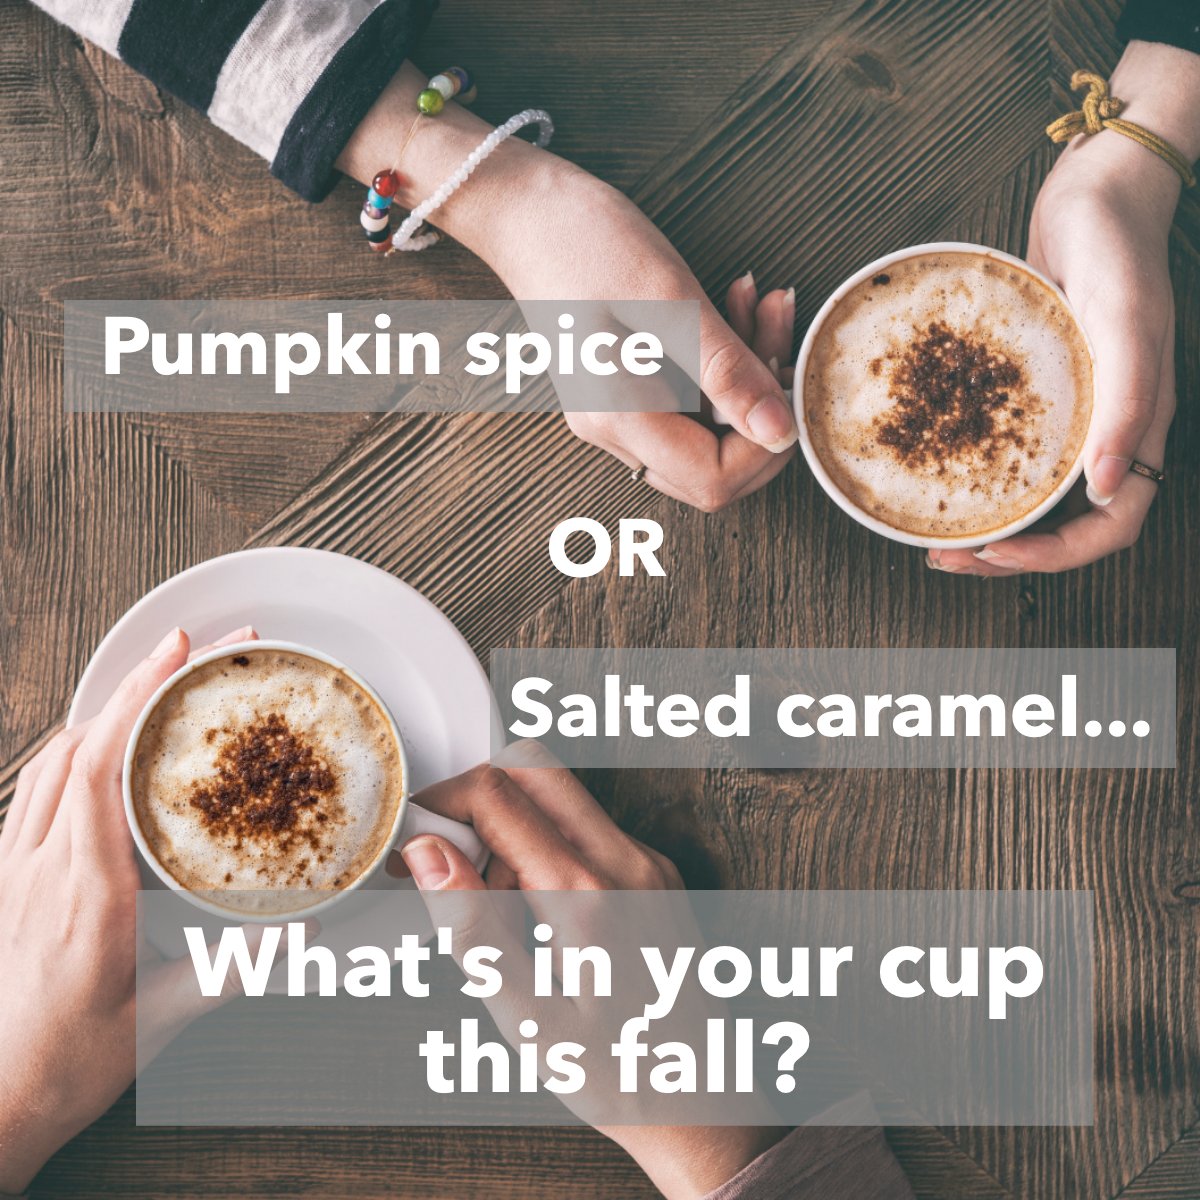 Pumpkin Spice or Salted Caramel? Or do you have any other favorite drinks this season? #fallseason #fallstyle #Fall